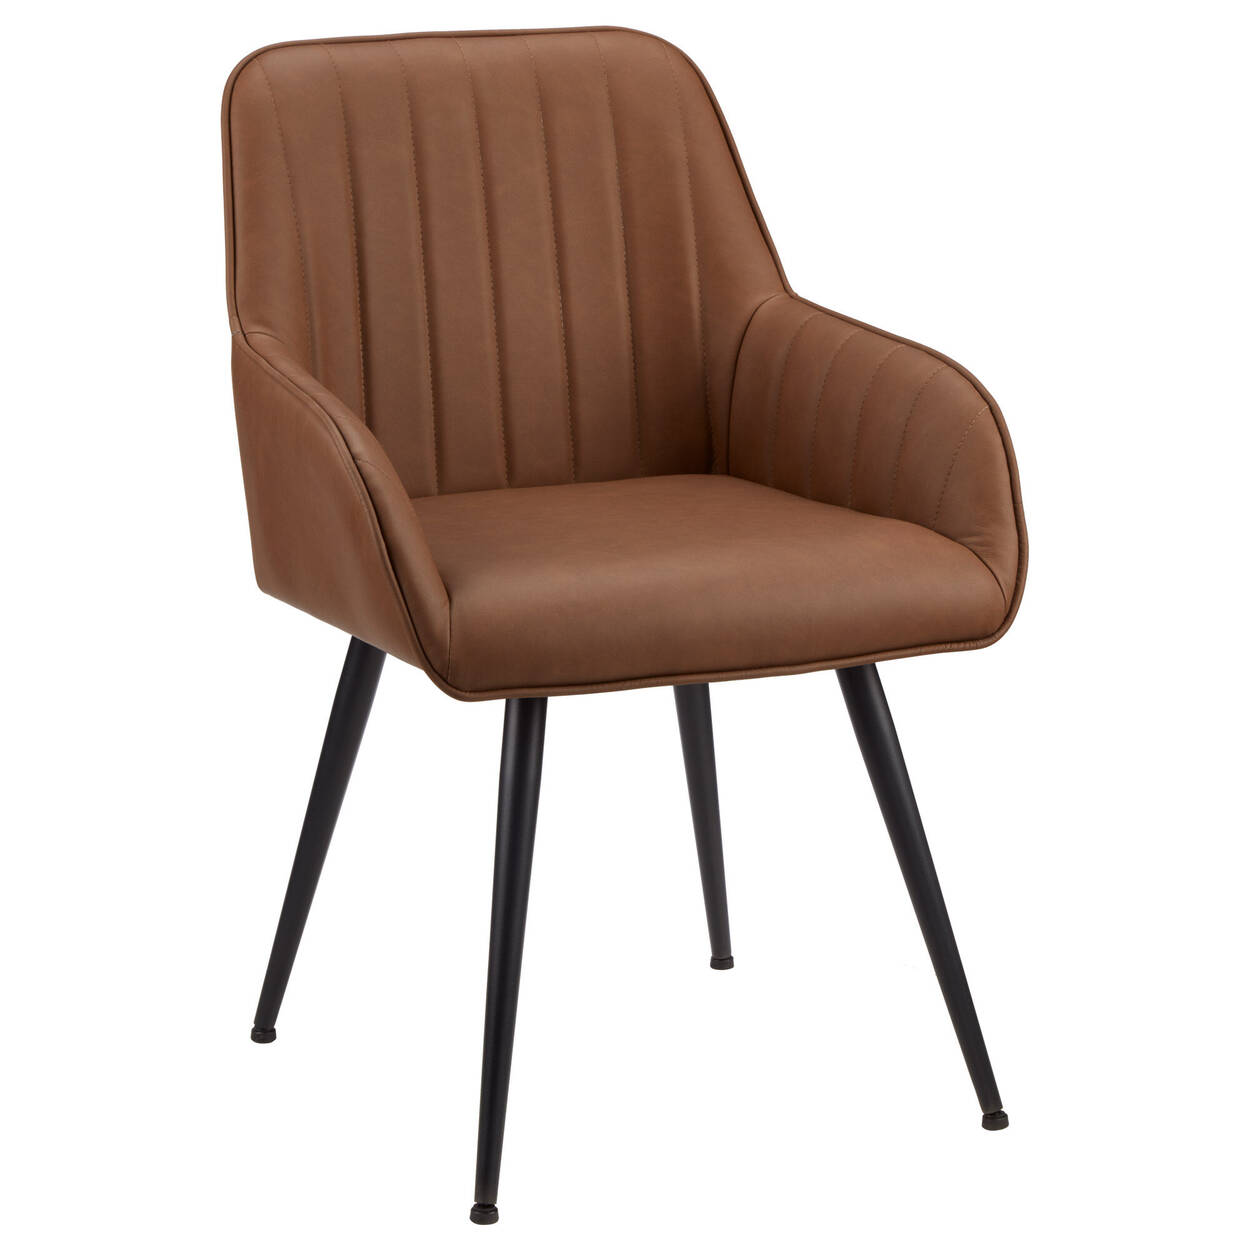 Textured Faux Leather And Metal Dining Chair